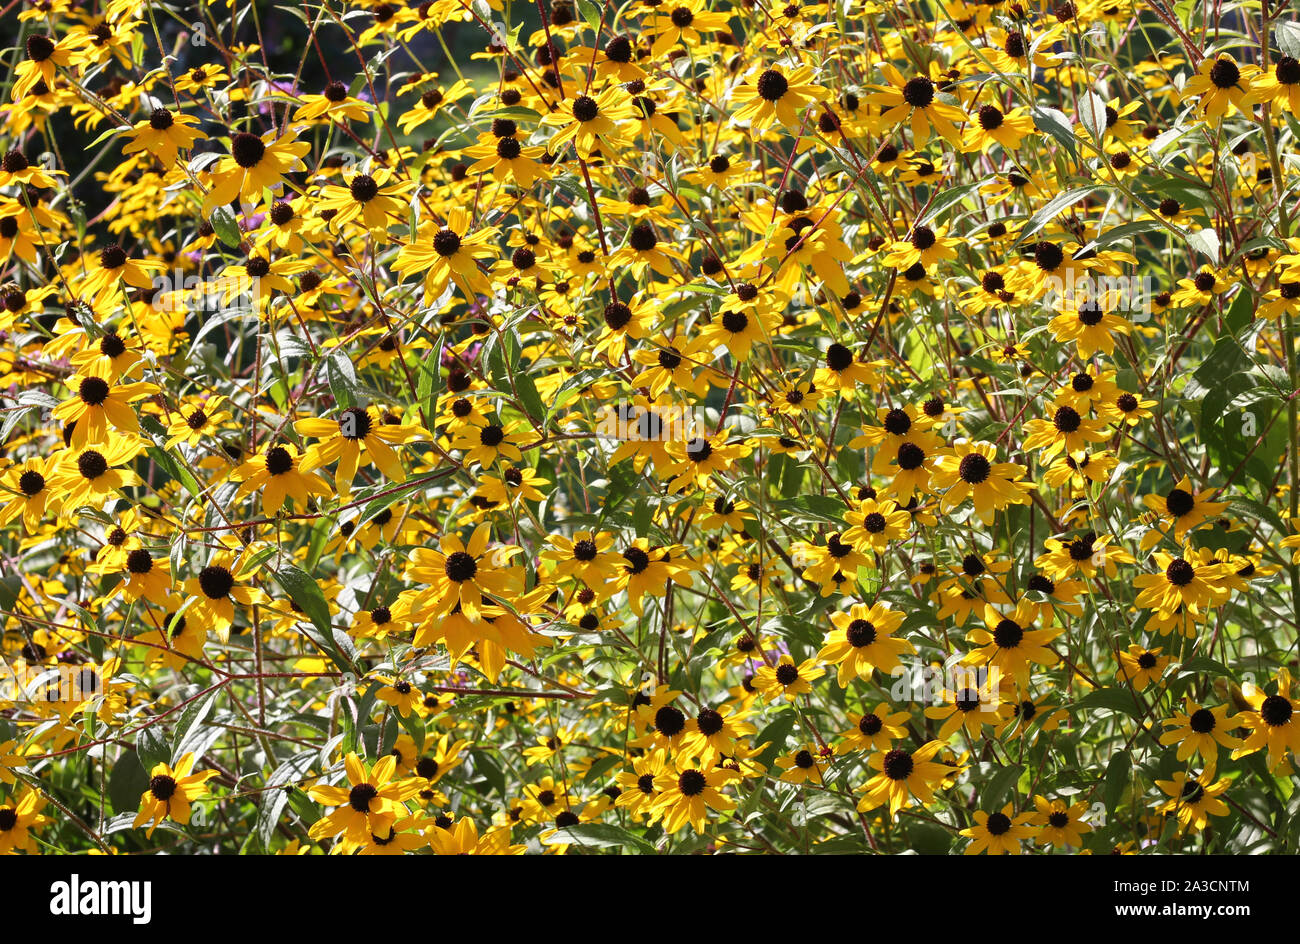 Meadow of black eyed yellow sunhat flowers in the afternoon sun, echinacea. Stock Photo